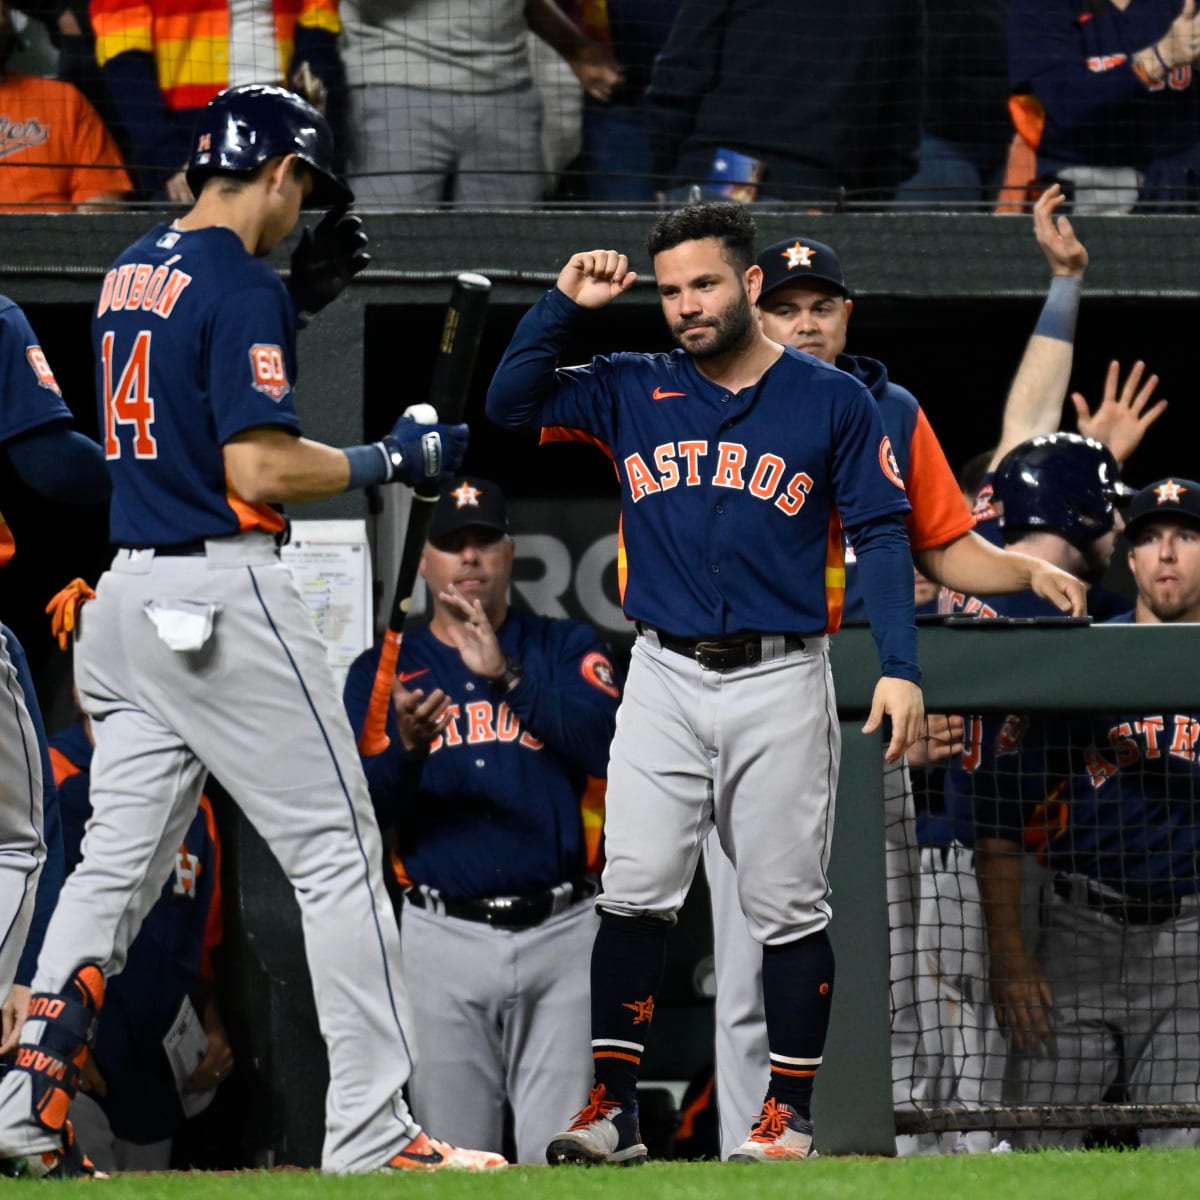 Astros rally past Orioles to give Baker milestone 100th win - The